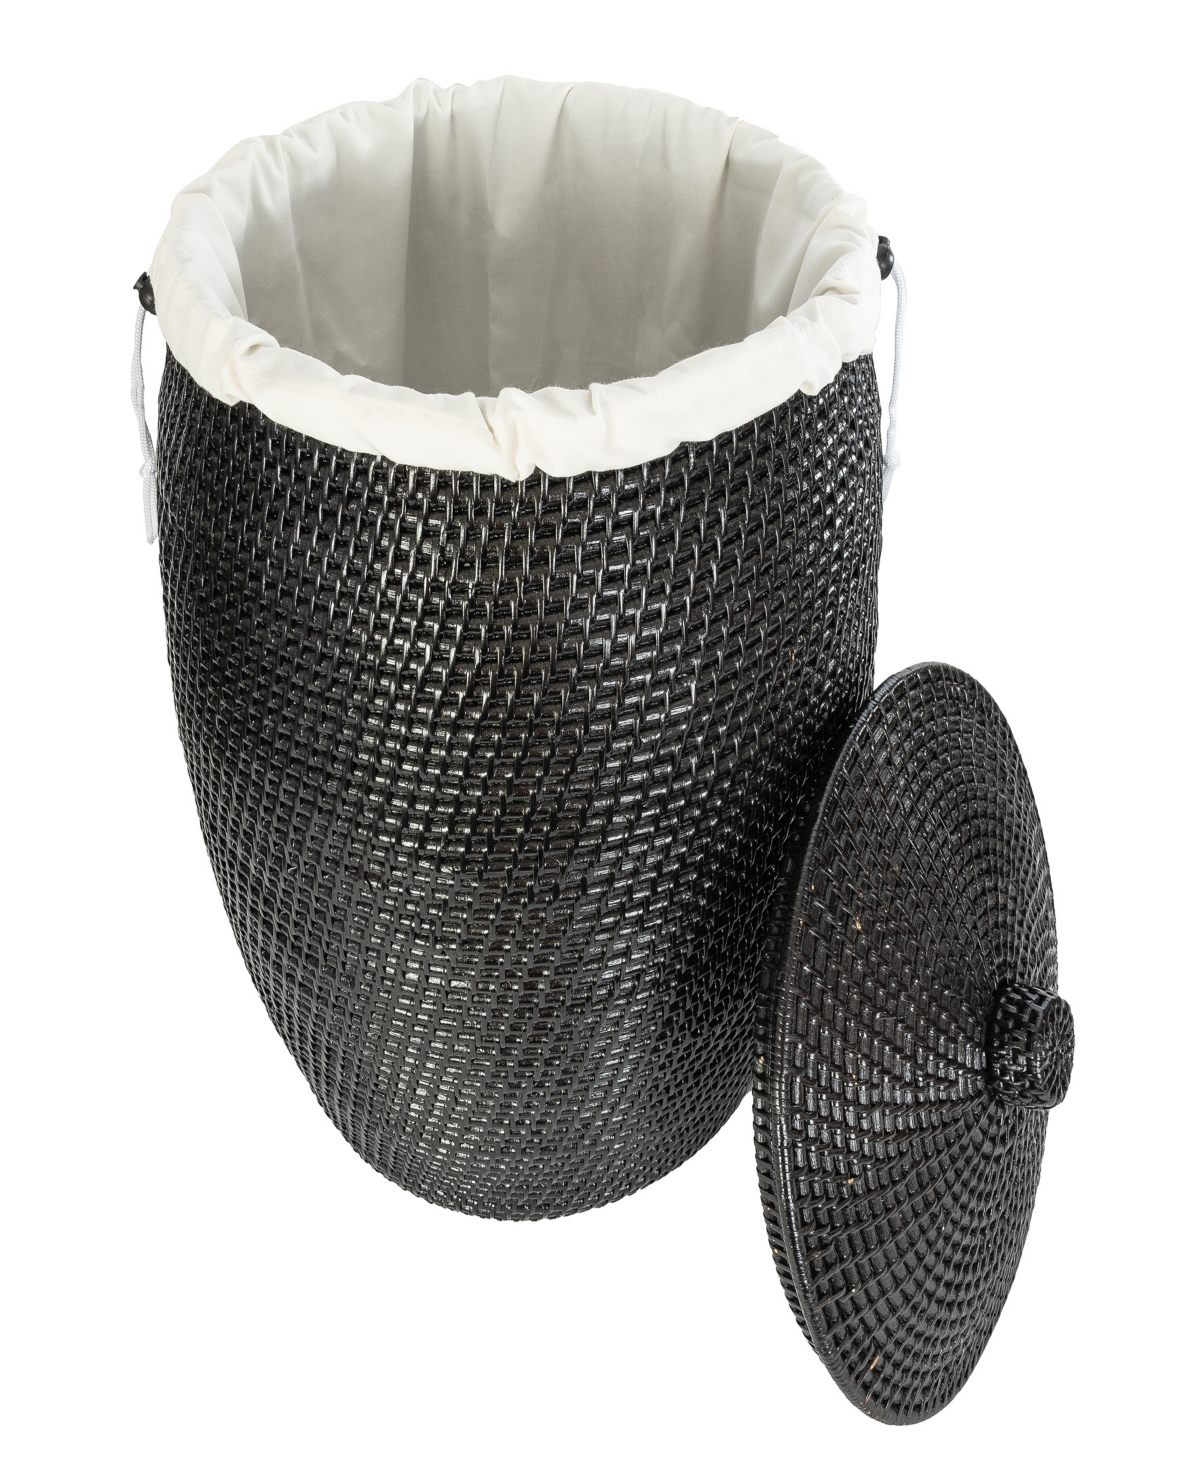 Shop Artifacts Trading Company Saboga Home Beehive Laundry Hamper With Liner In Tudor Black